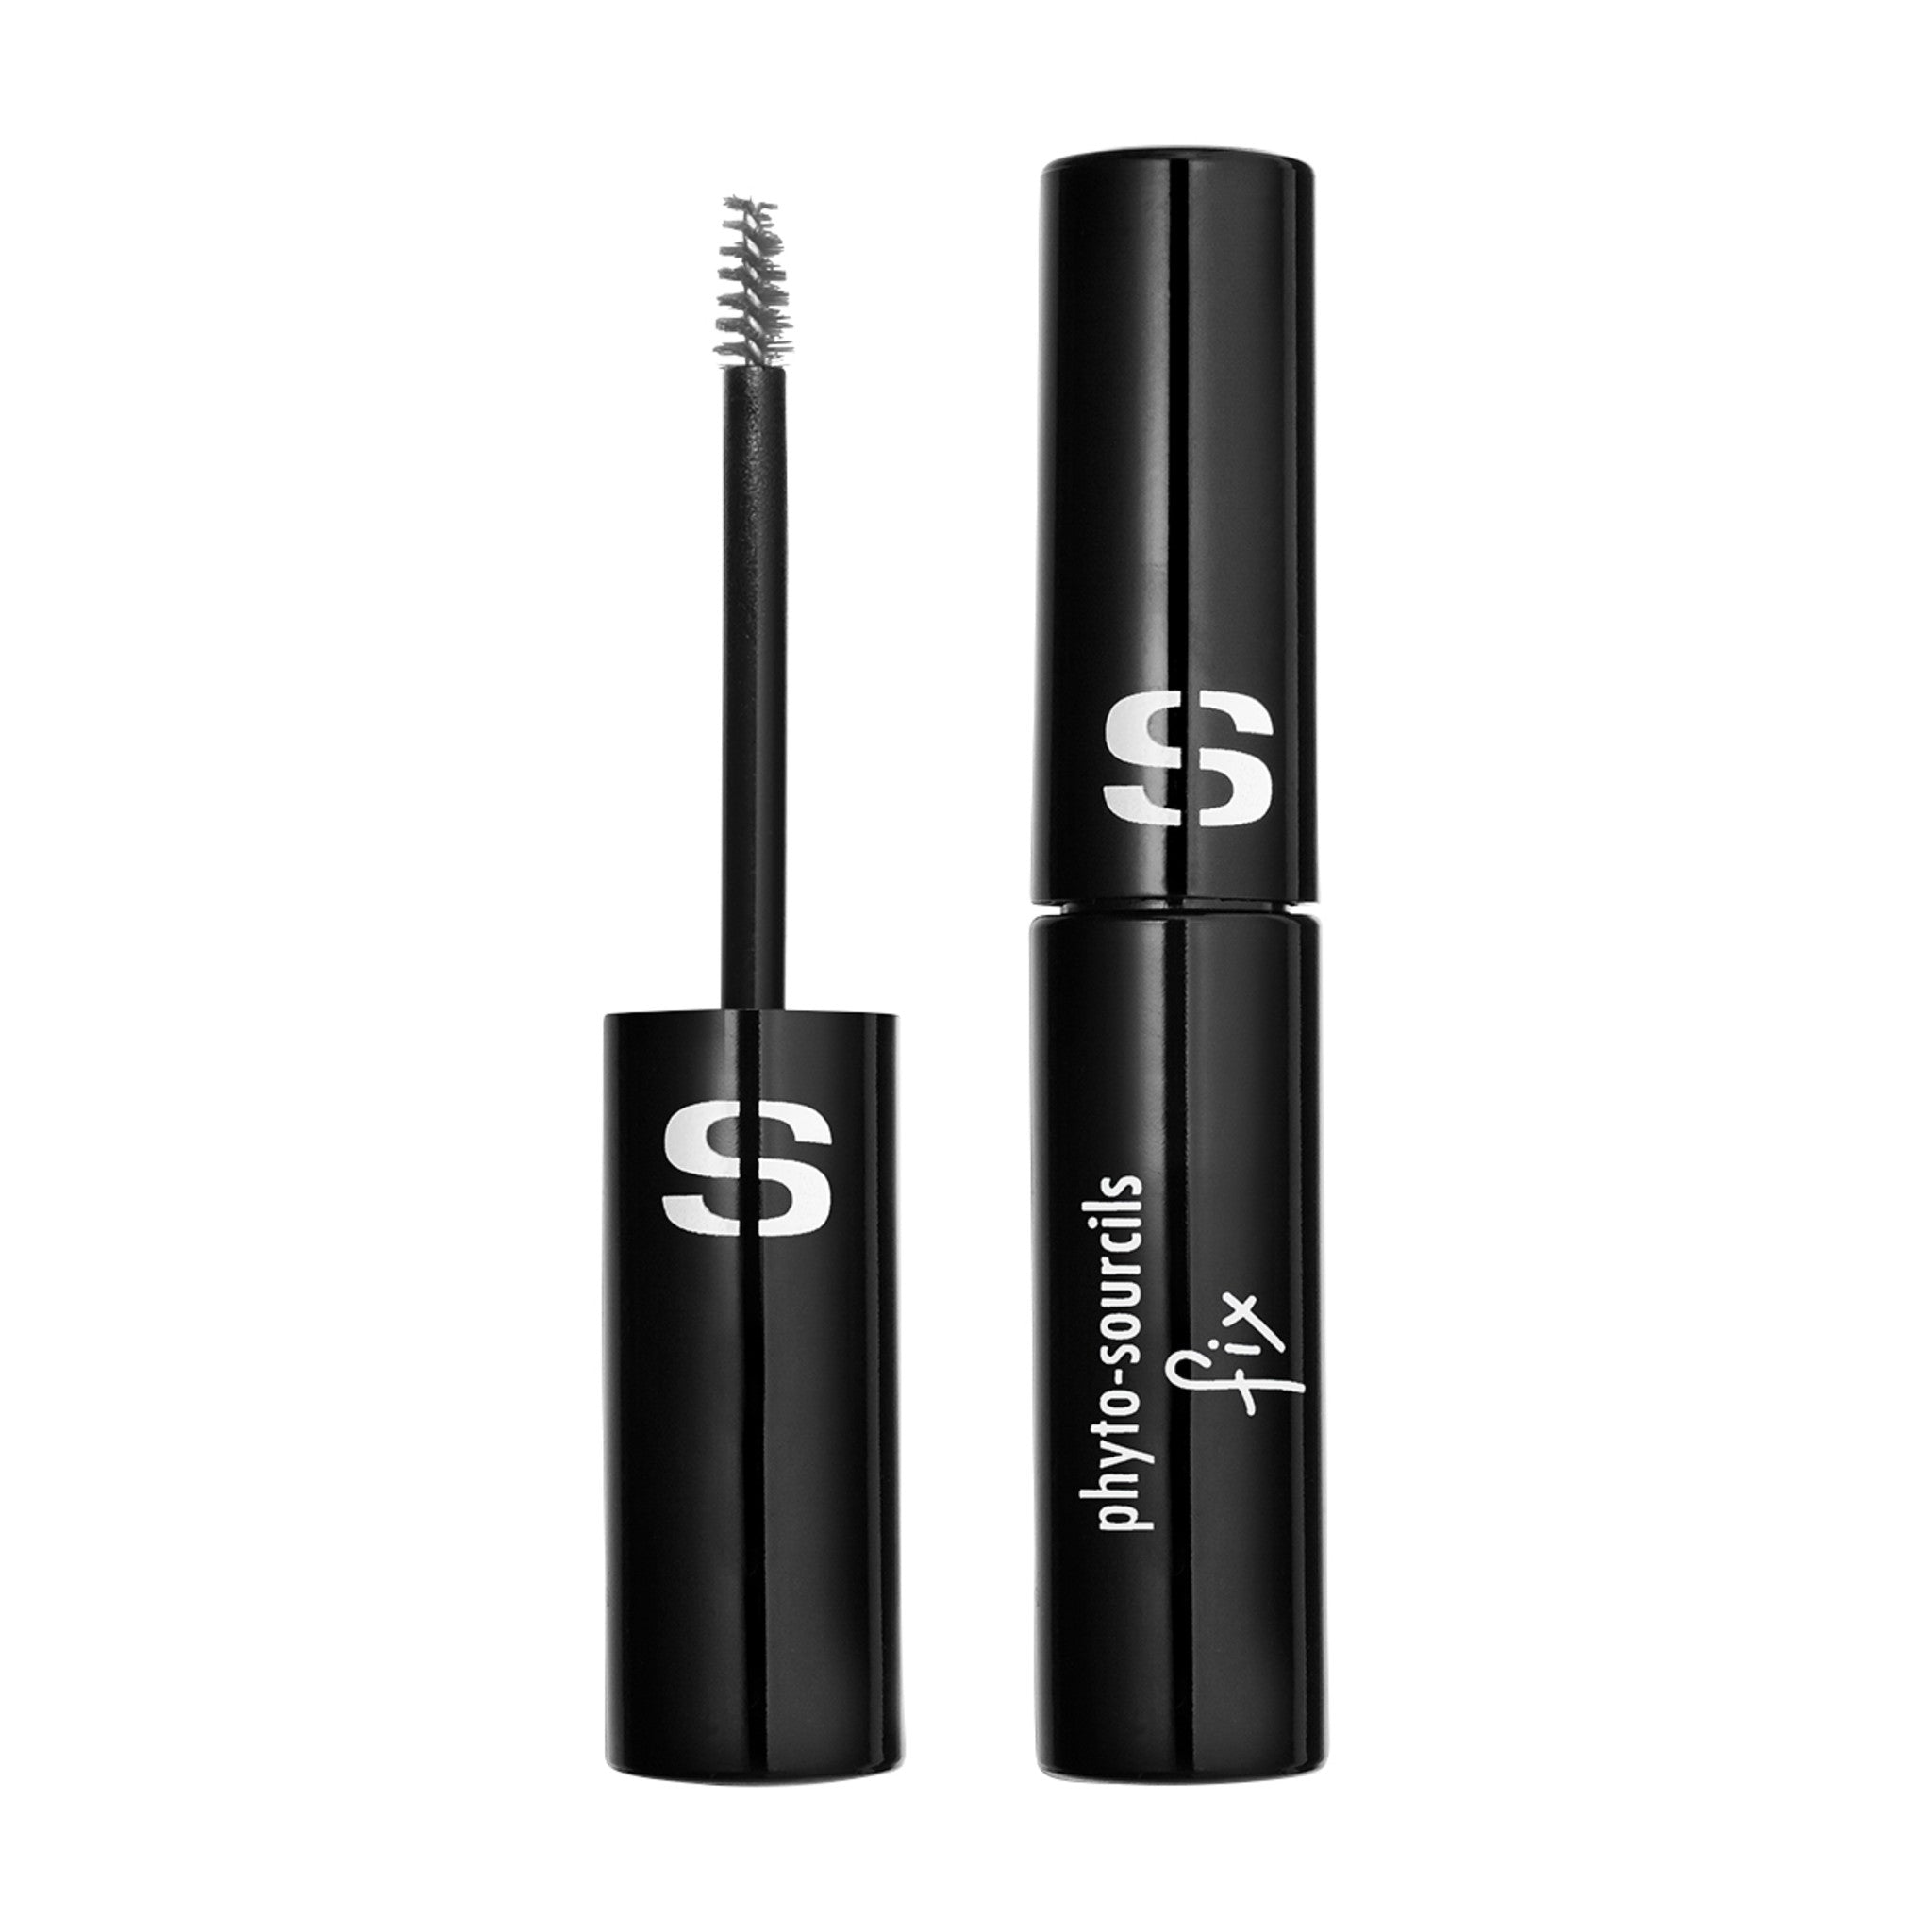 Sisley-Paris Phyto-Sourcils Fix Eyebrow Gel Color/Shade variant: 2 Medium Dark main image. This product is in the color brown